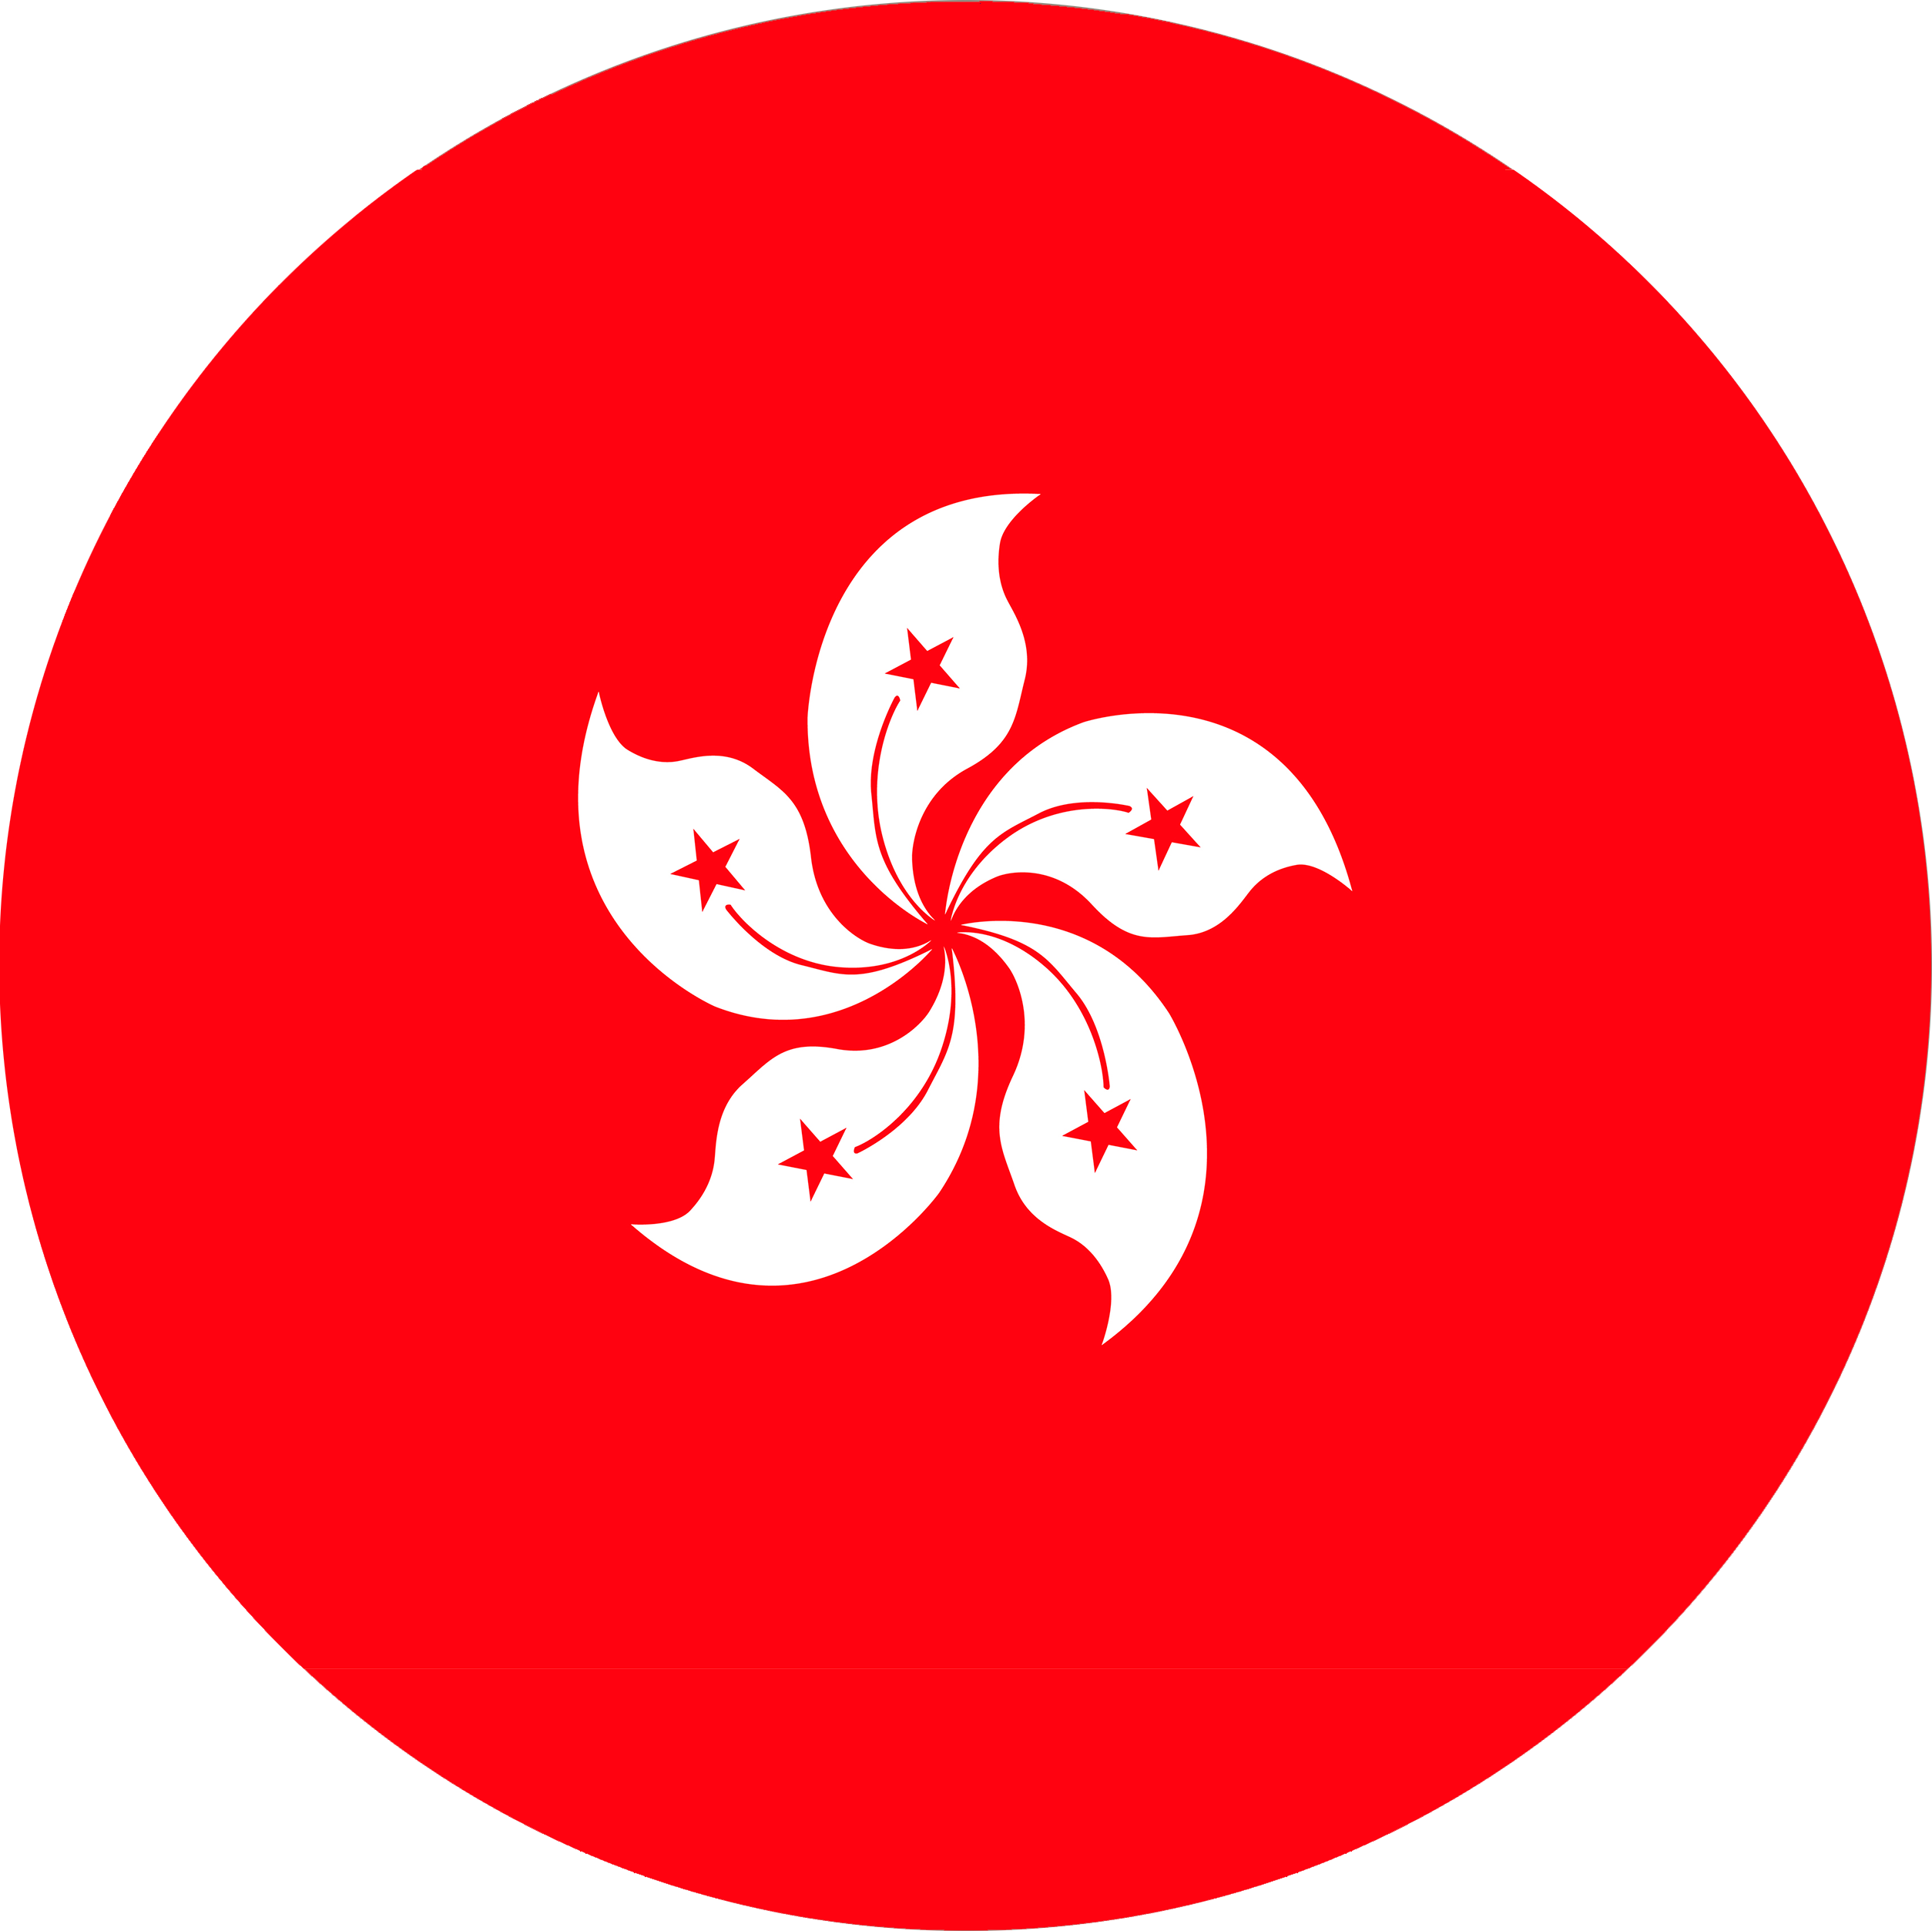 Country flag of HKD